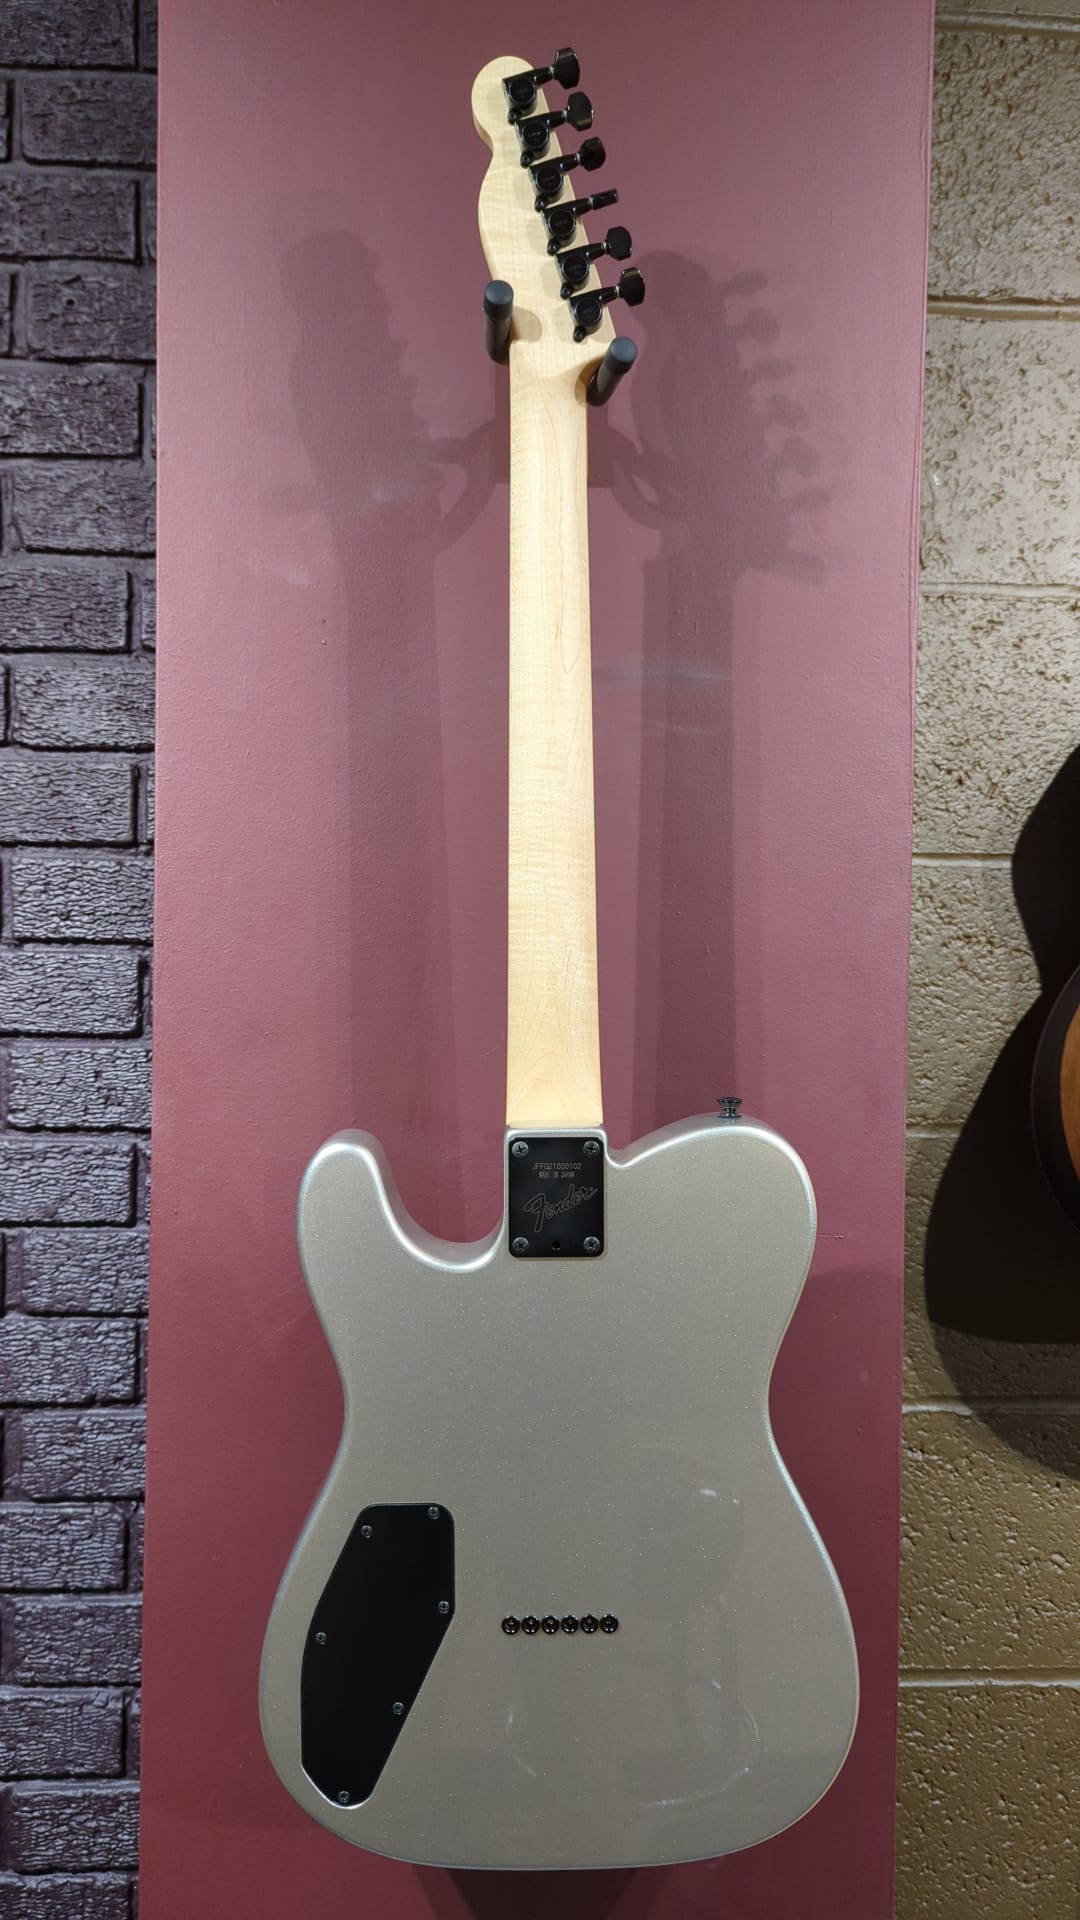 Fender MIJ boxer Telecaster HH (Used), Electric Guitar for sale at Richards Guitars.